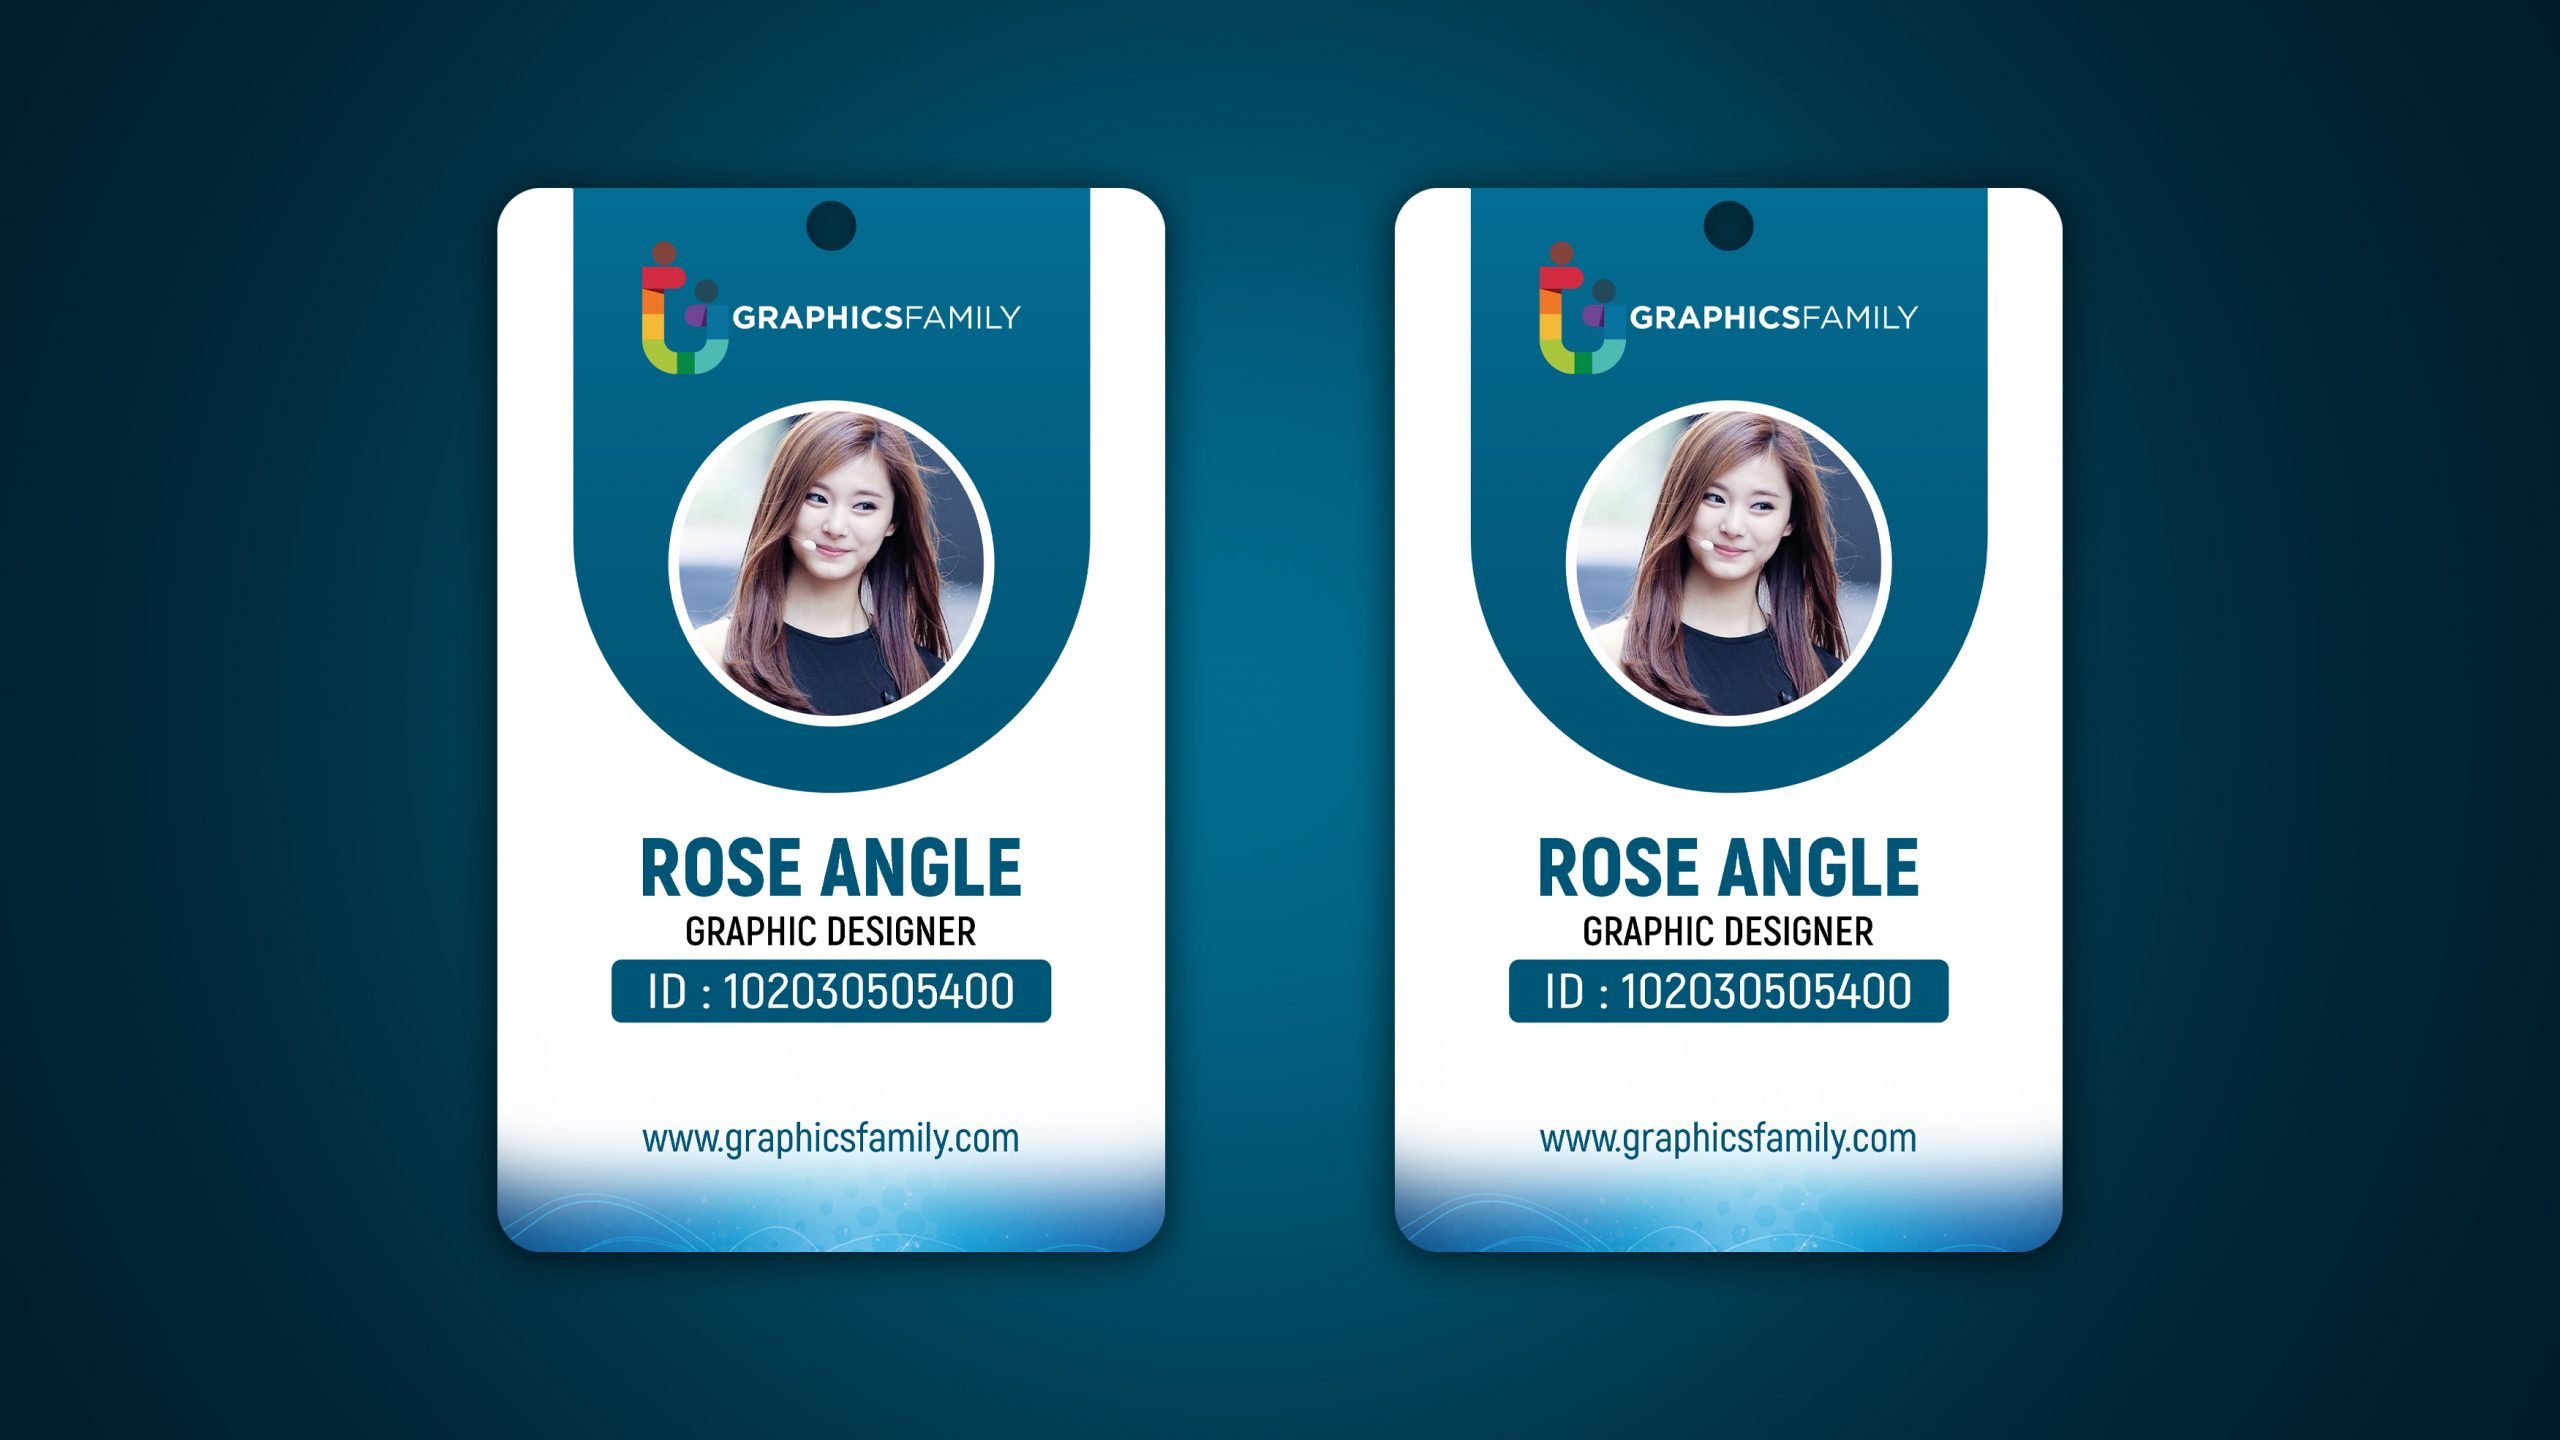 Company idCard Design Free psd Template GraphicsFamily